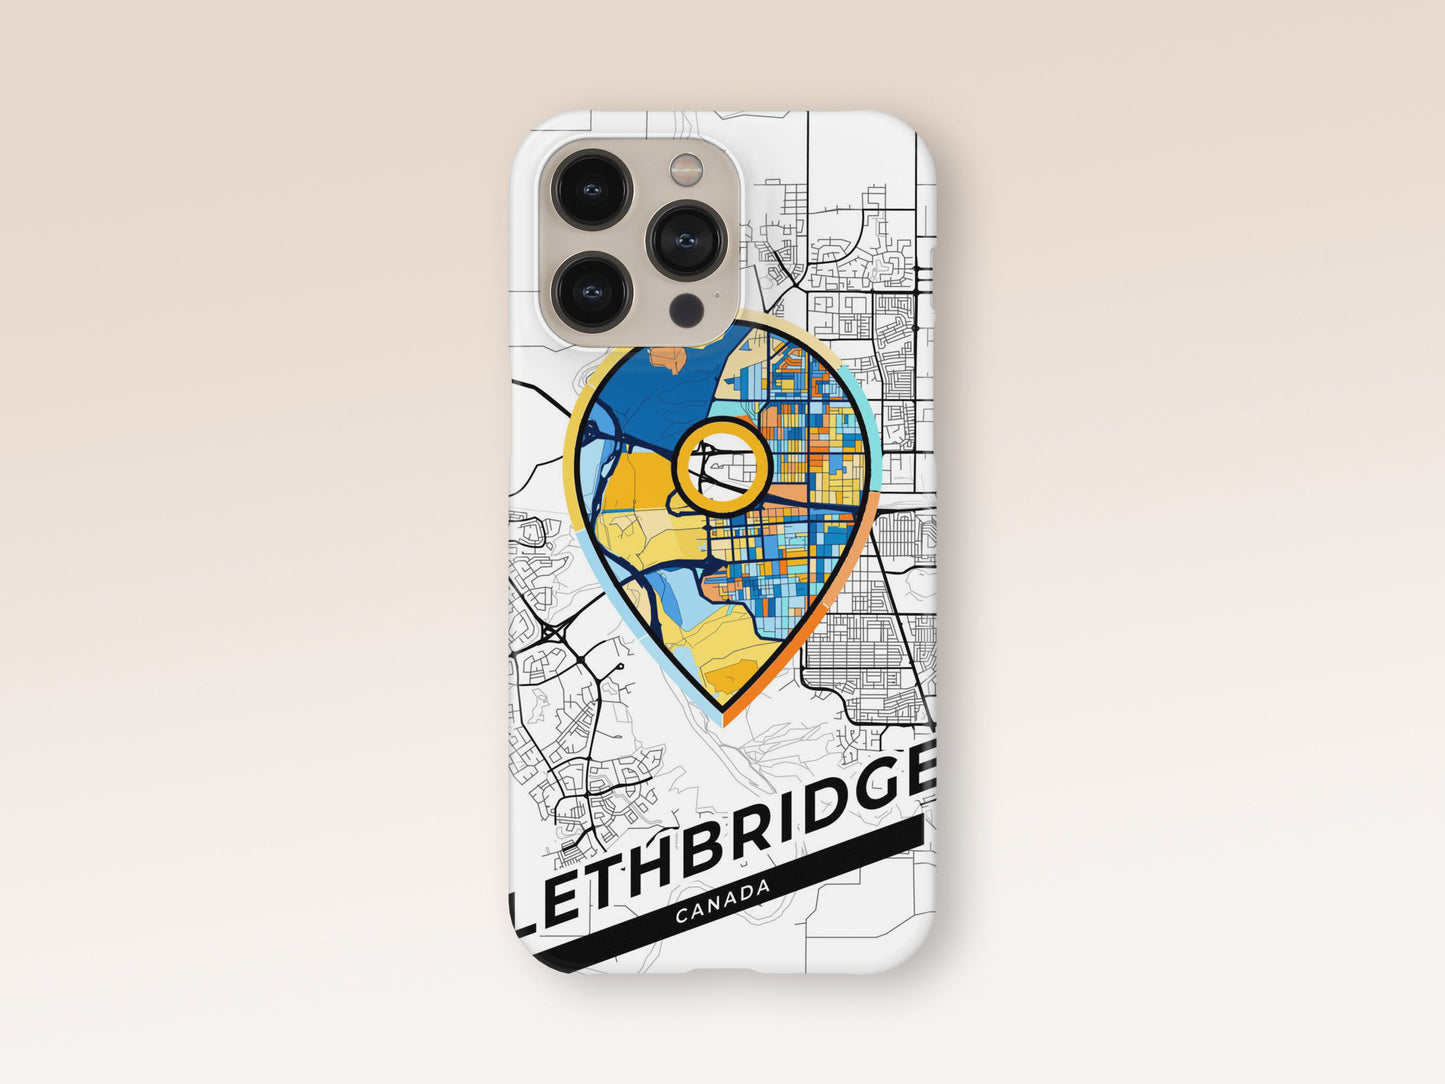 Lethbridge Canada slim phone case with colorful icon. Birthday, wedding or housewarming gift. Couple match cases. 1